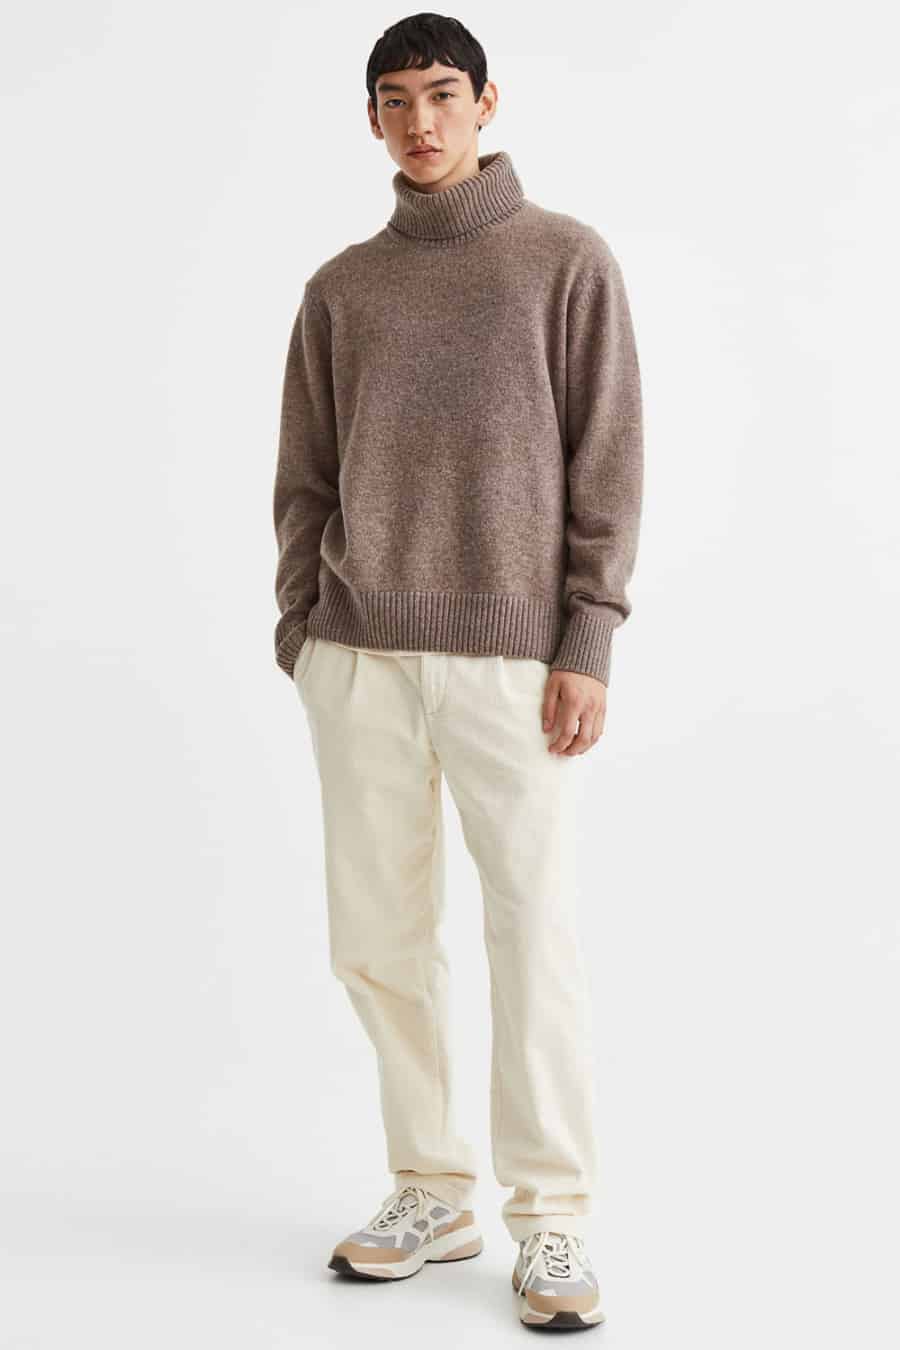 Men's off-white relaxed trousers, chunky brown roll neck jumper and running sneakers outfit